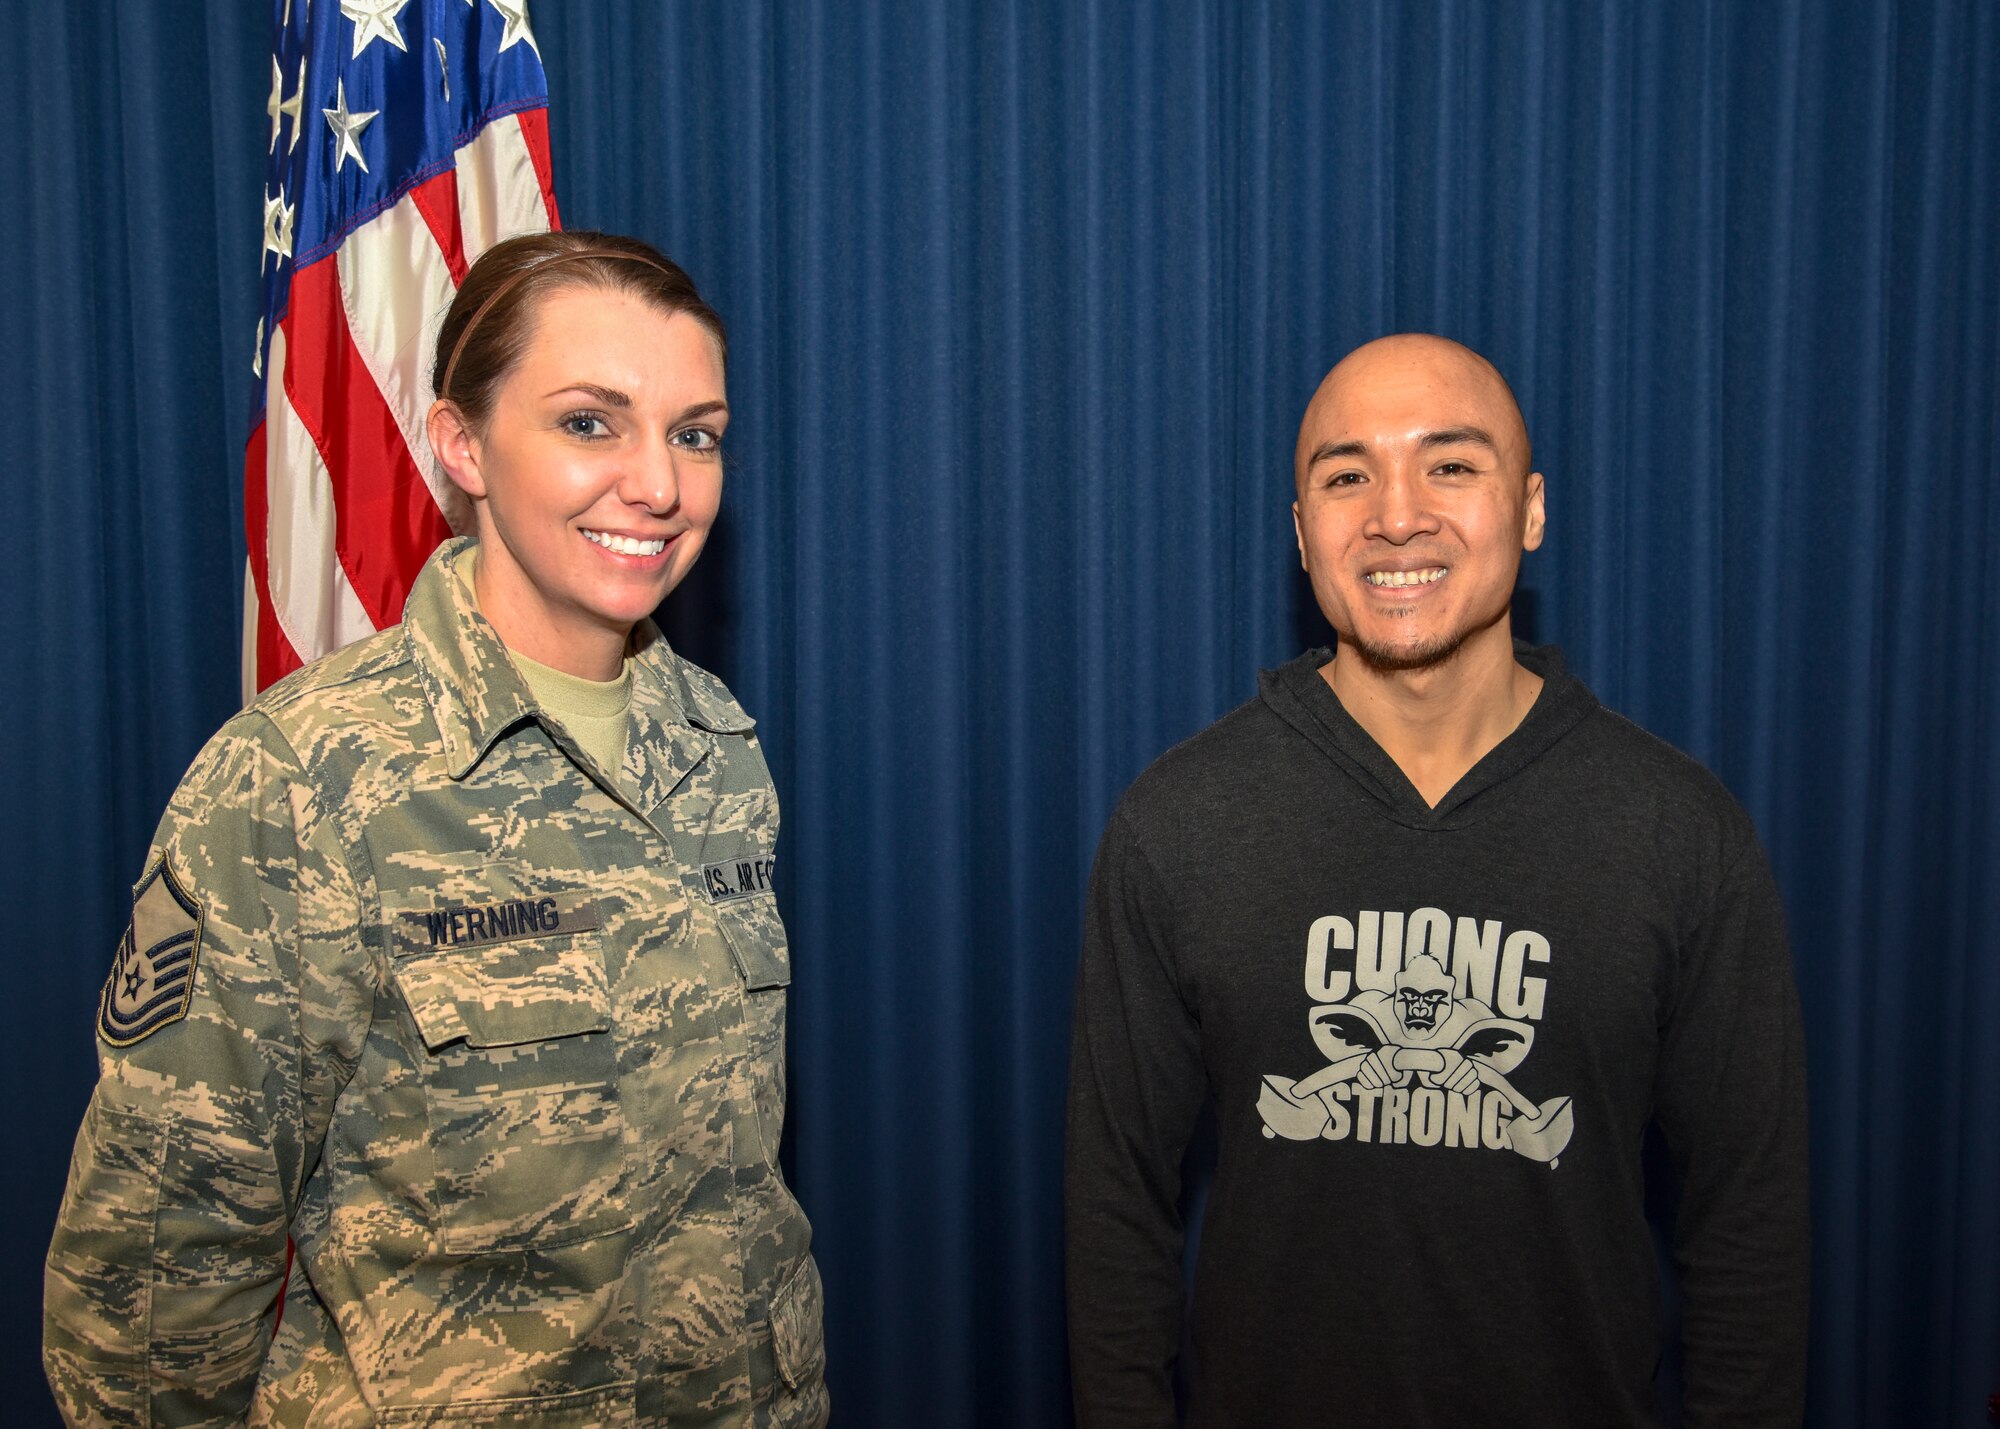 Master Sergeant Jayme Werning, 114th bio-environmental engineer non-commissioned officer in charge and member of the 114th FW Top 3 organization, invited Cuong Nguyen, owner of Cuong Strong Personal Training and Fitness, to speak with members of the wing about the annual physical training test and overall health and fitness.